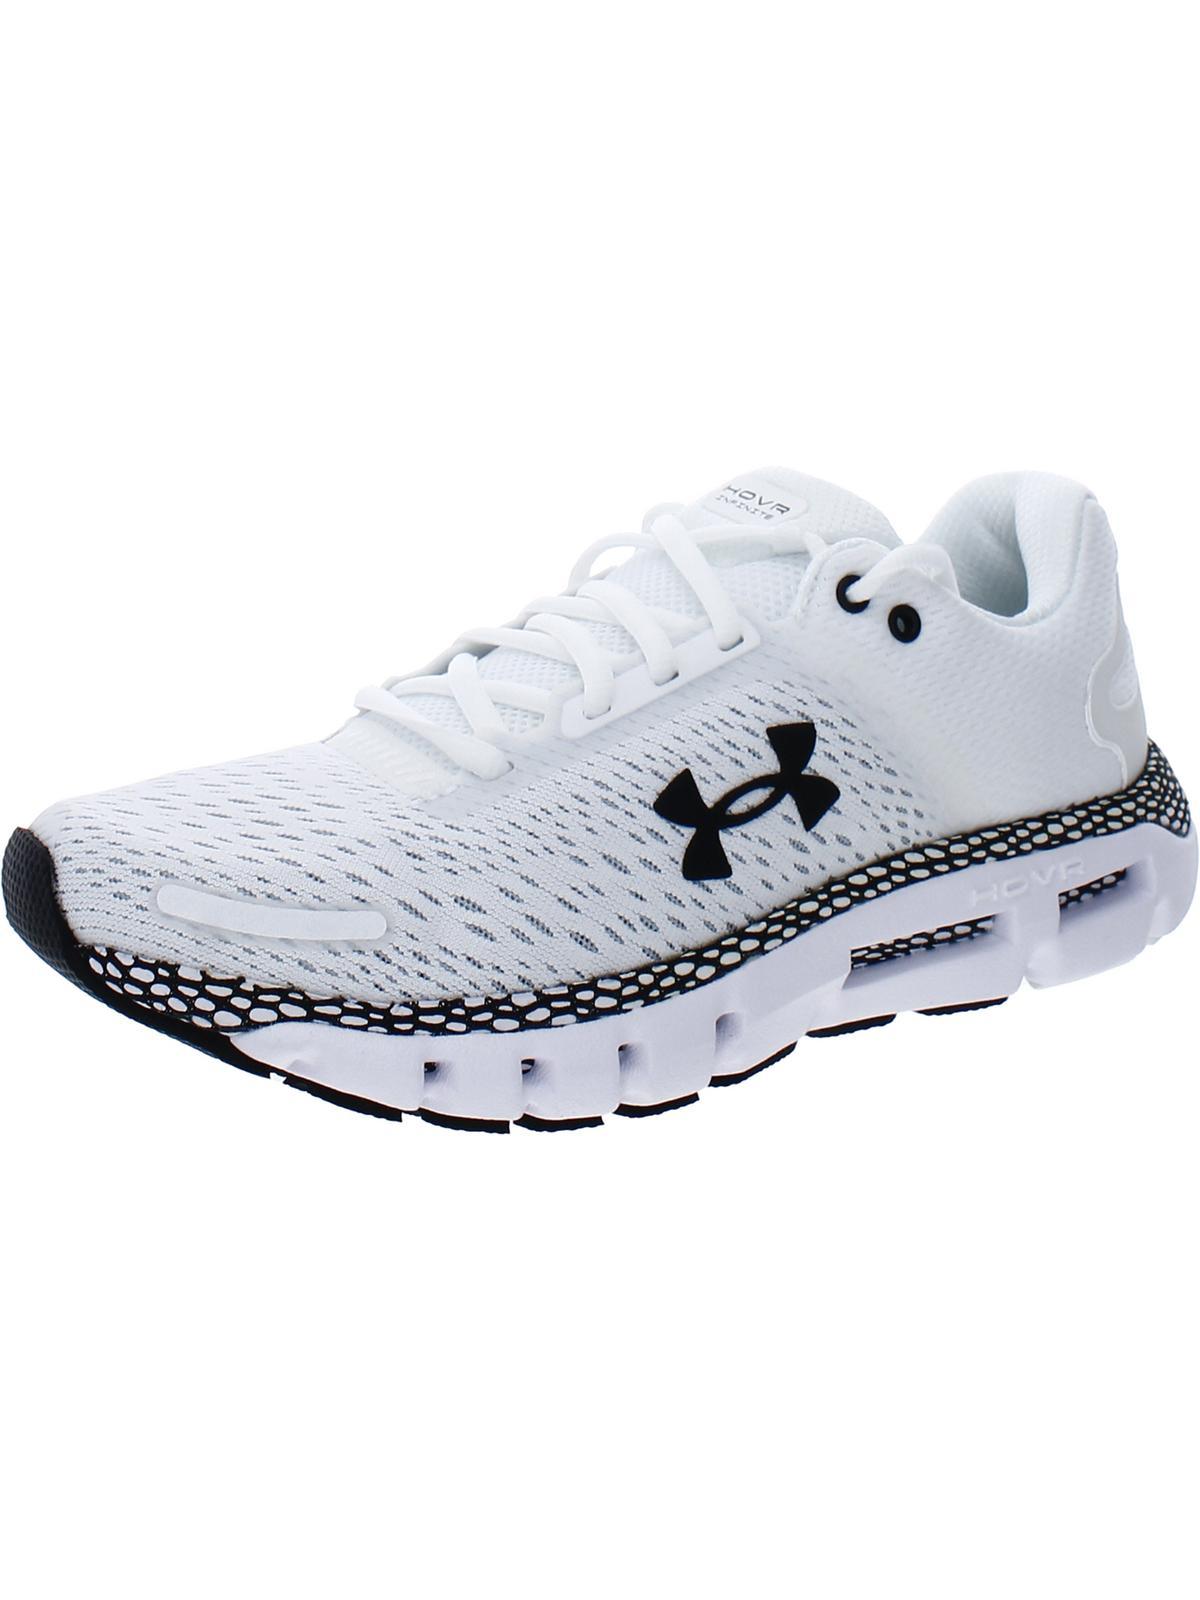 Under Armour Hovr Infinite 2 Bluetooth Performance Smart Shoes in White |  Lyst